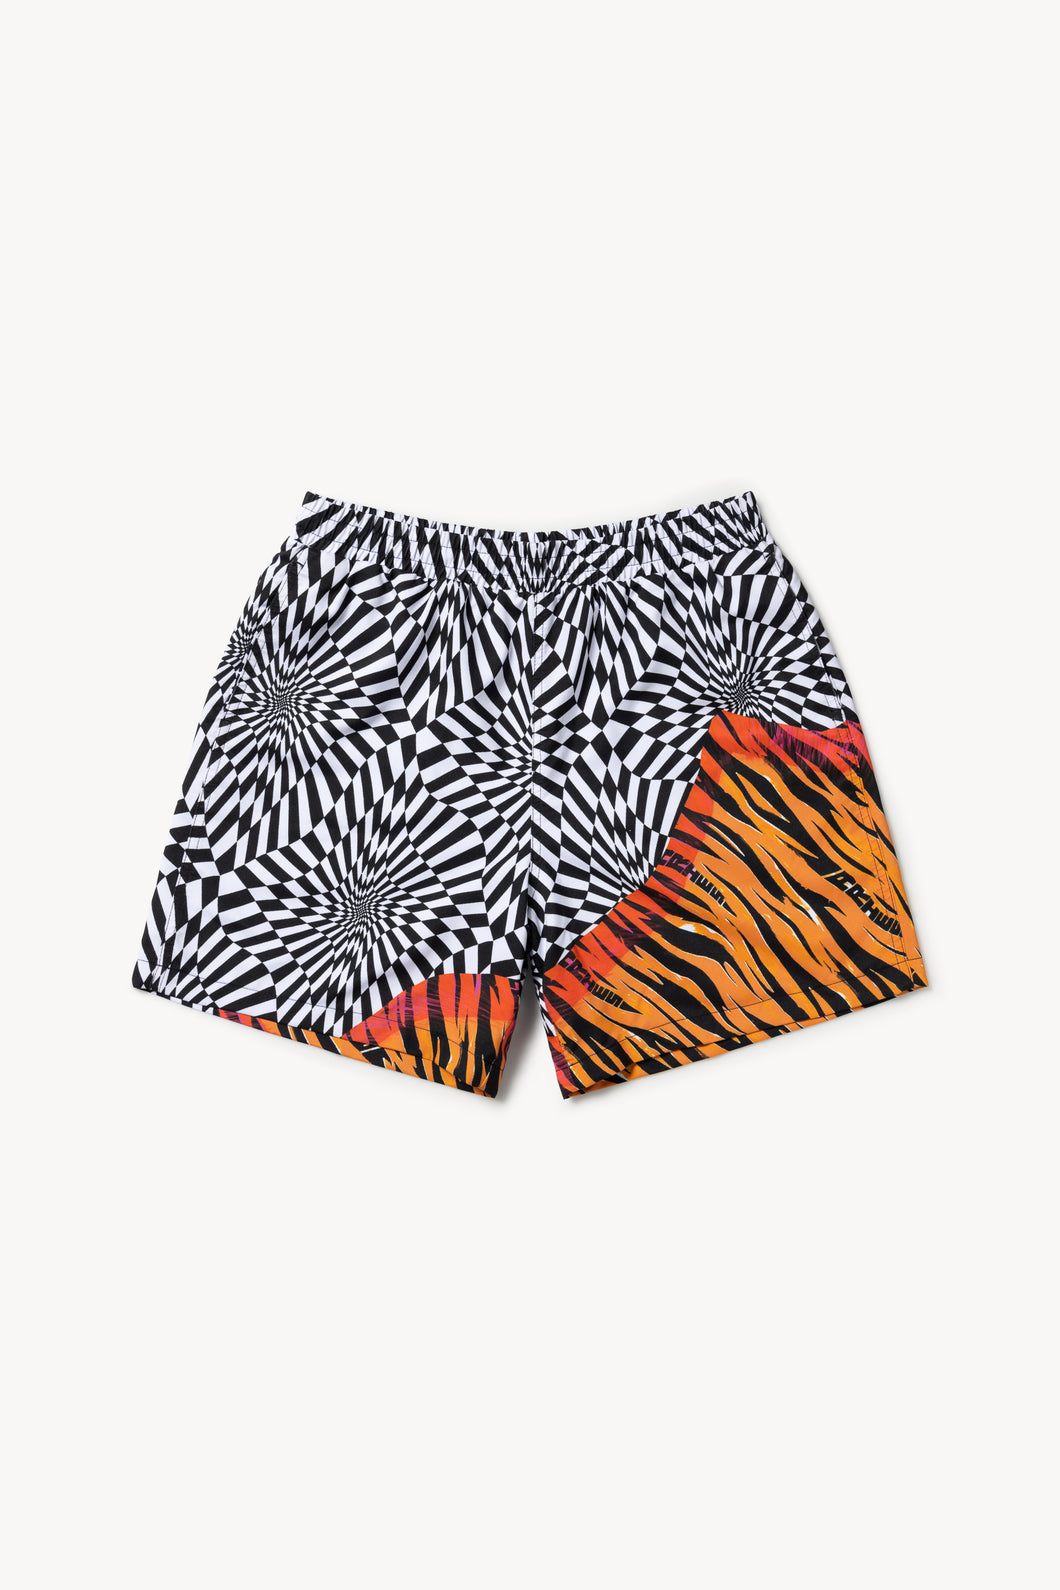 Aries x Vault by Vans Distorted Cheque Shorts